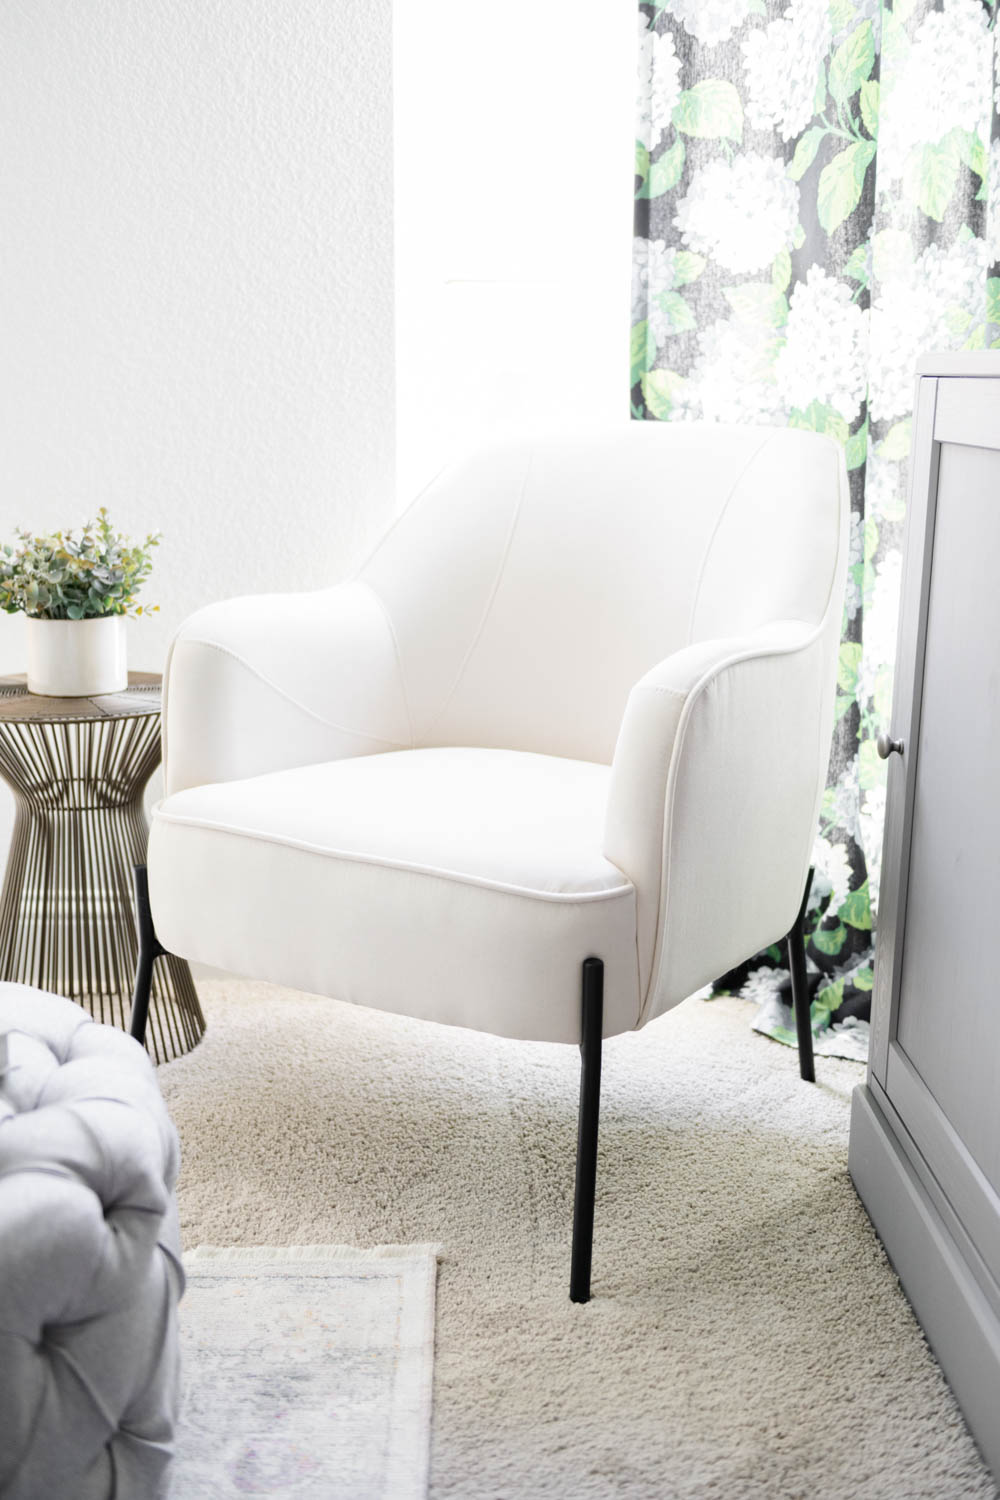 Modern white chair with black iron legs in front of a window.